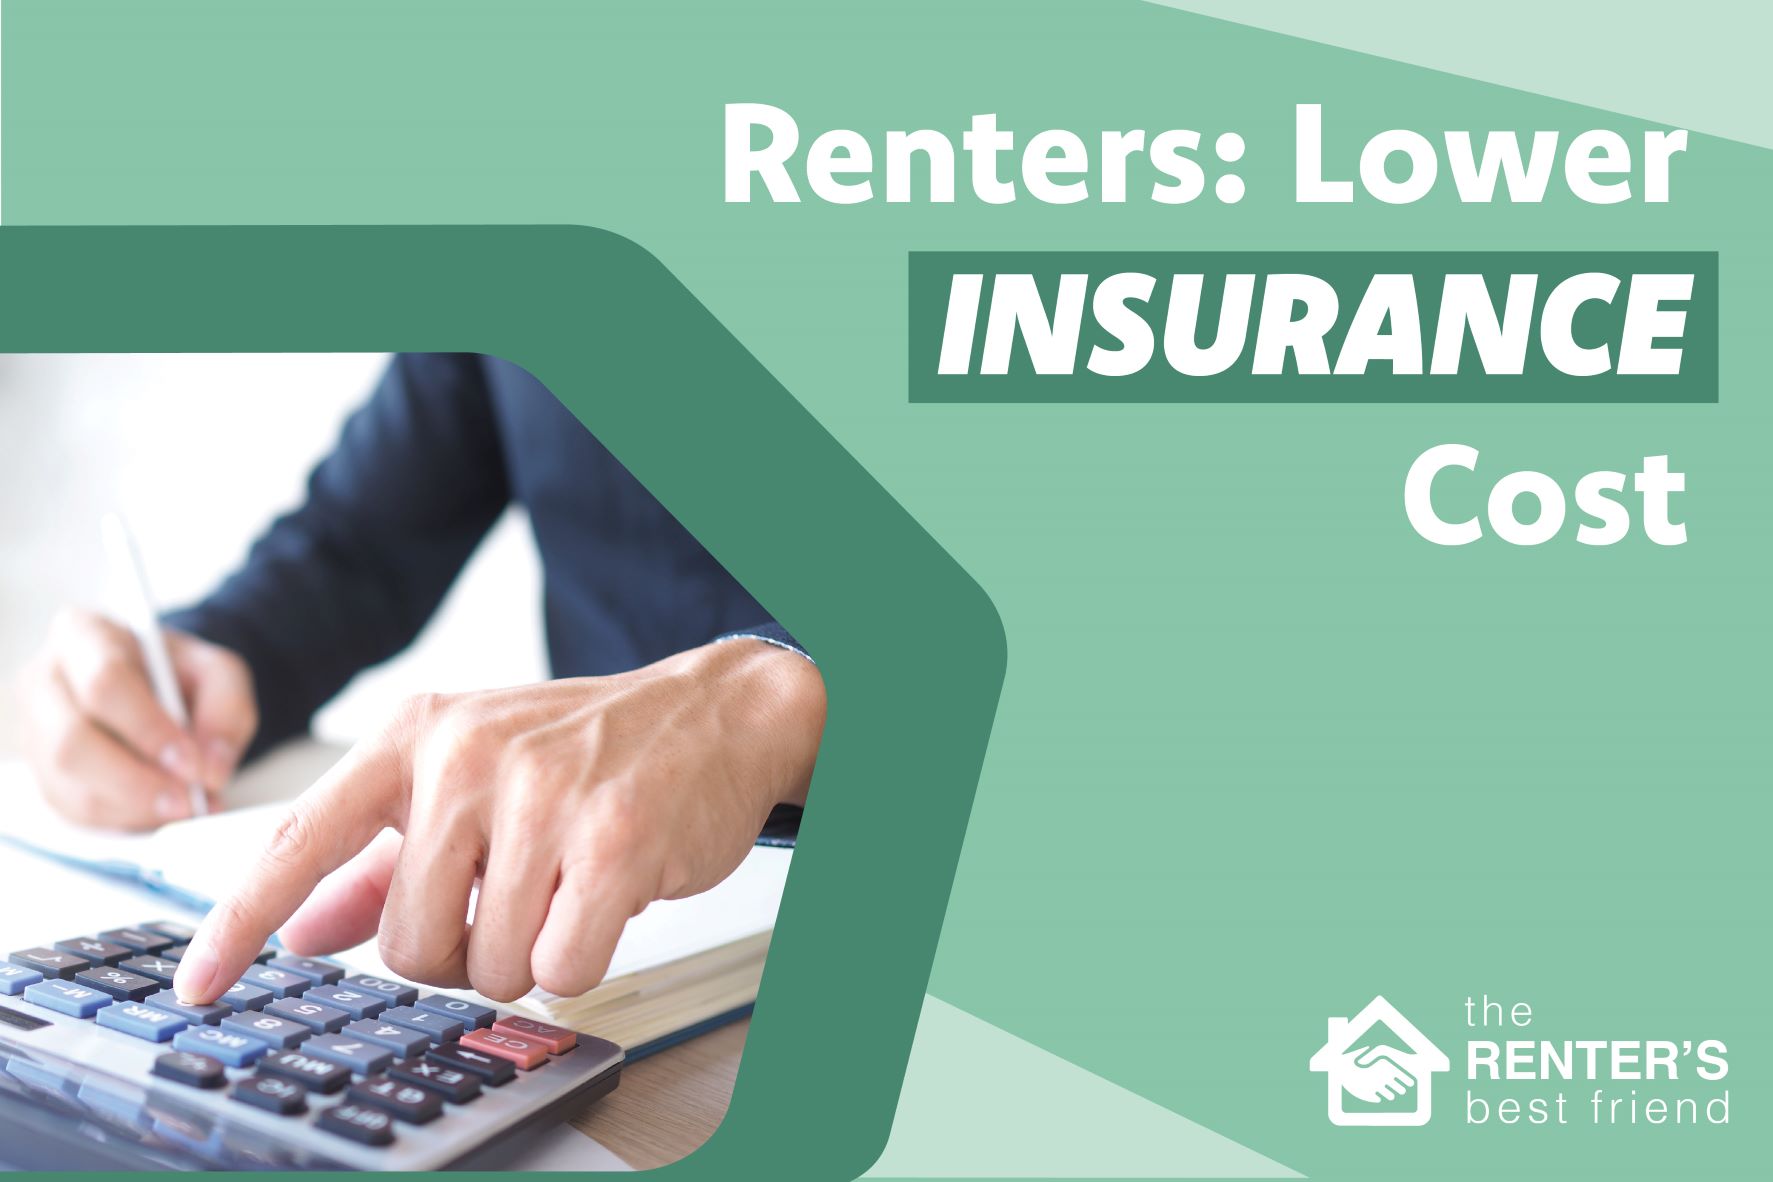 Lower insurance costs as a renter.